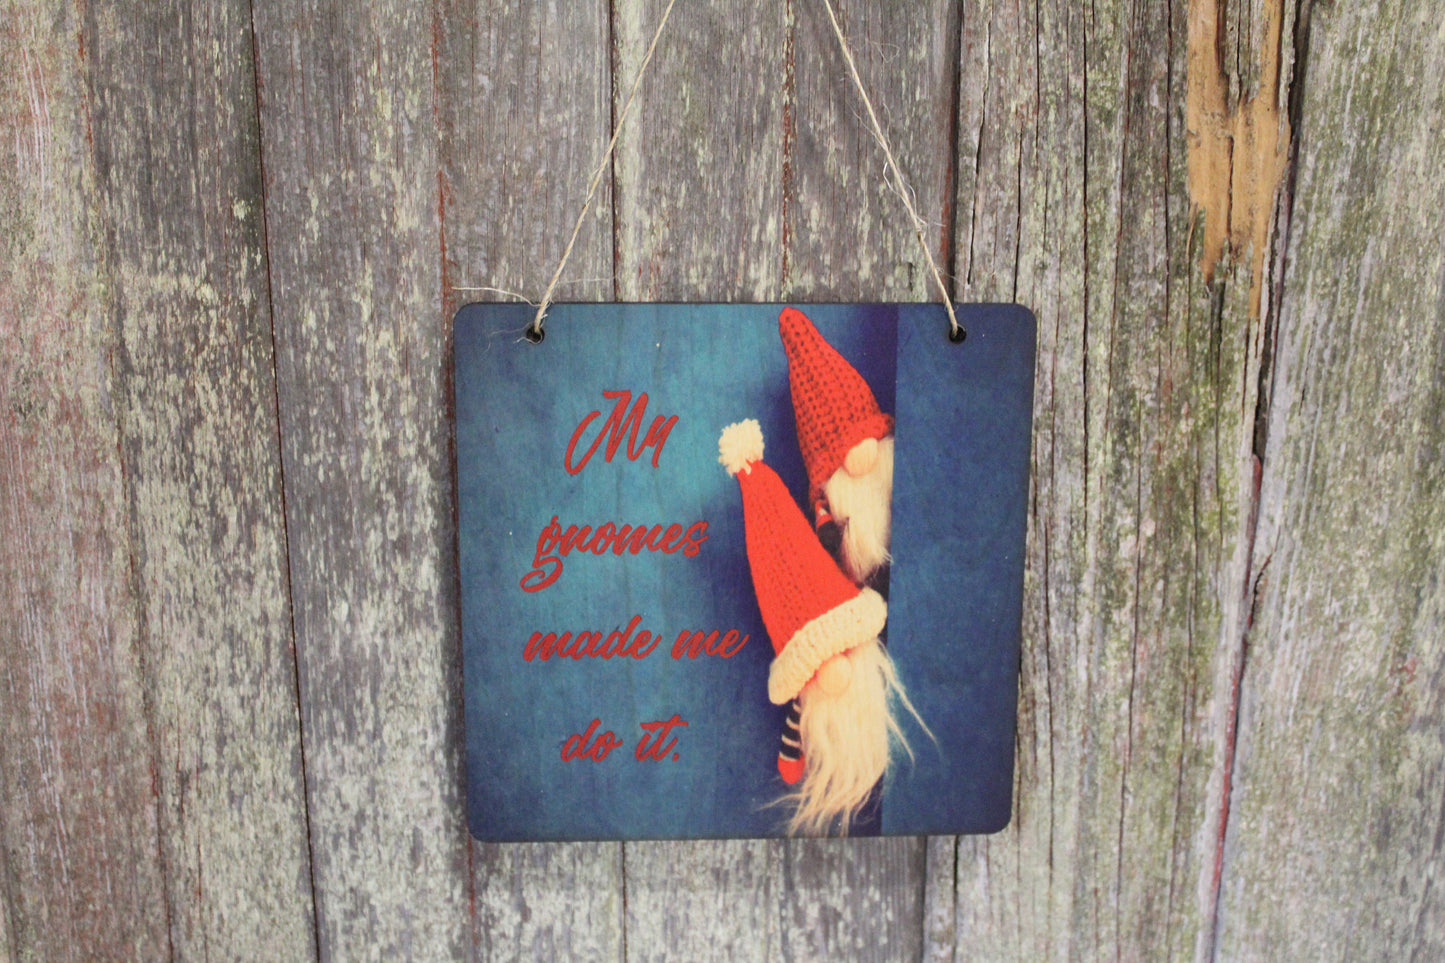 Gnome Silly Wood Sign My Gnomes Made Me Do It Trolls Elves Mischievous Wall Hanging Print Decor Decoration Wooden Christmas Elf on Shelf